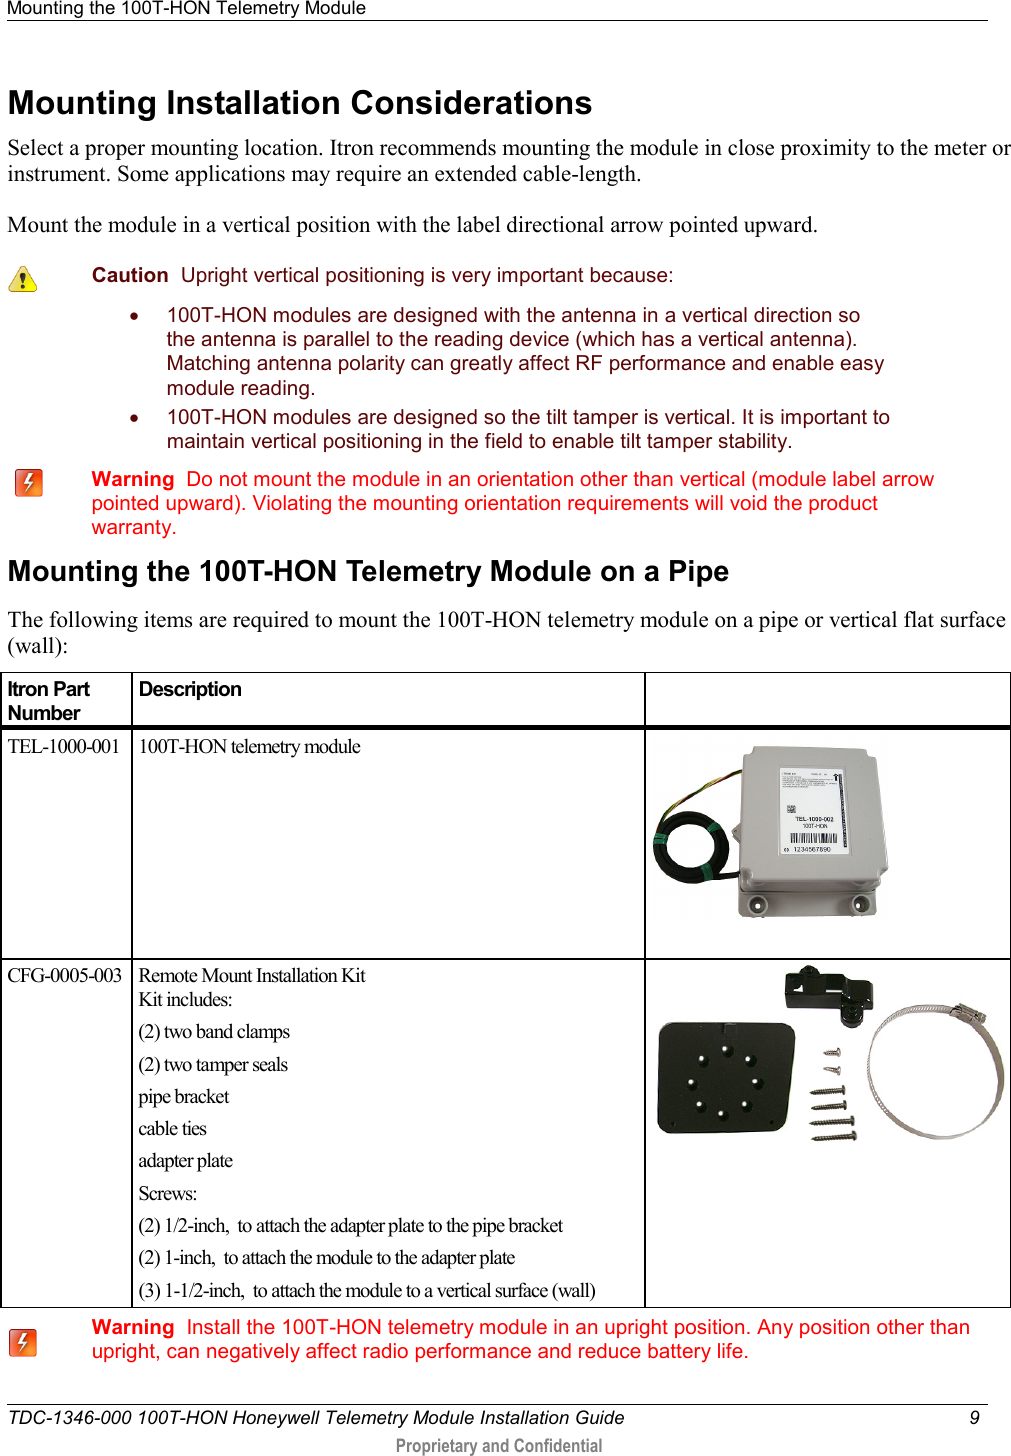 Mounting the 100T-HON Telemetry Module   TDC-1346-000 100T-HON Honeywell Telemetry Module Installation Guide  9   Proprietary and Confidential     Mounting Installation Considerations Select a proper mounting location. Itron recommends mounting the module in close proximity to the meter or instrument. Some applications may require an extended cable-length.  Mount the module in a vertical position with the label directional arrow pointed upward.   Caution  Upright vertical positioning is very important because: • 100T-HON modules are designed with the antenna in a vertical direction so the antenna is parallel to the reading device (which has a vertical antenna). Matching antenna polarity can greatly affect RF performance and enable easy module reading. • 100T-HON modules are designed so the tilt tamper is vertical. It is important to maintain vertical positioning in the field to enable tilt tamper stability.     Warning  Do not mount the module in an orientation other than vertical (module label arrow pointed upward). Violating the mounting orientation requirements will void the product warranty.     Mounting the 100T-HON Telemetry Module on a Pipe The following items are required to mount the 100T-HON telemetry module on a pipe or vertical flat surface (wall): Itron Part Number Description   TEL-1000-001  100T-HON telemetry module   CFG-0005-003 Remote Mount Installation Kit Kit includes:  (2) two band clamps (2) two tamper seals pipe bracket cable ties adapter plate Screws: (2) 1/2-inch,  to attach the adapter plate to the pipe bracket (2) 1-inch,  to attach the module to the adapter plate (3) 1-1/2-inch,  to attach the module to a vertical surface (wall)    Warning  Install the 100T-HON telemetry module in an upright position. Any position other than upright, can negatively affect radio performance and reduce battery life.  